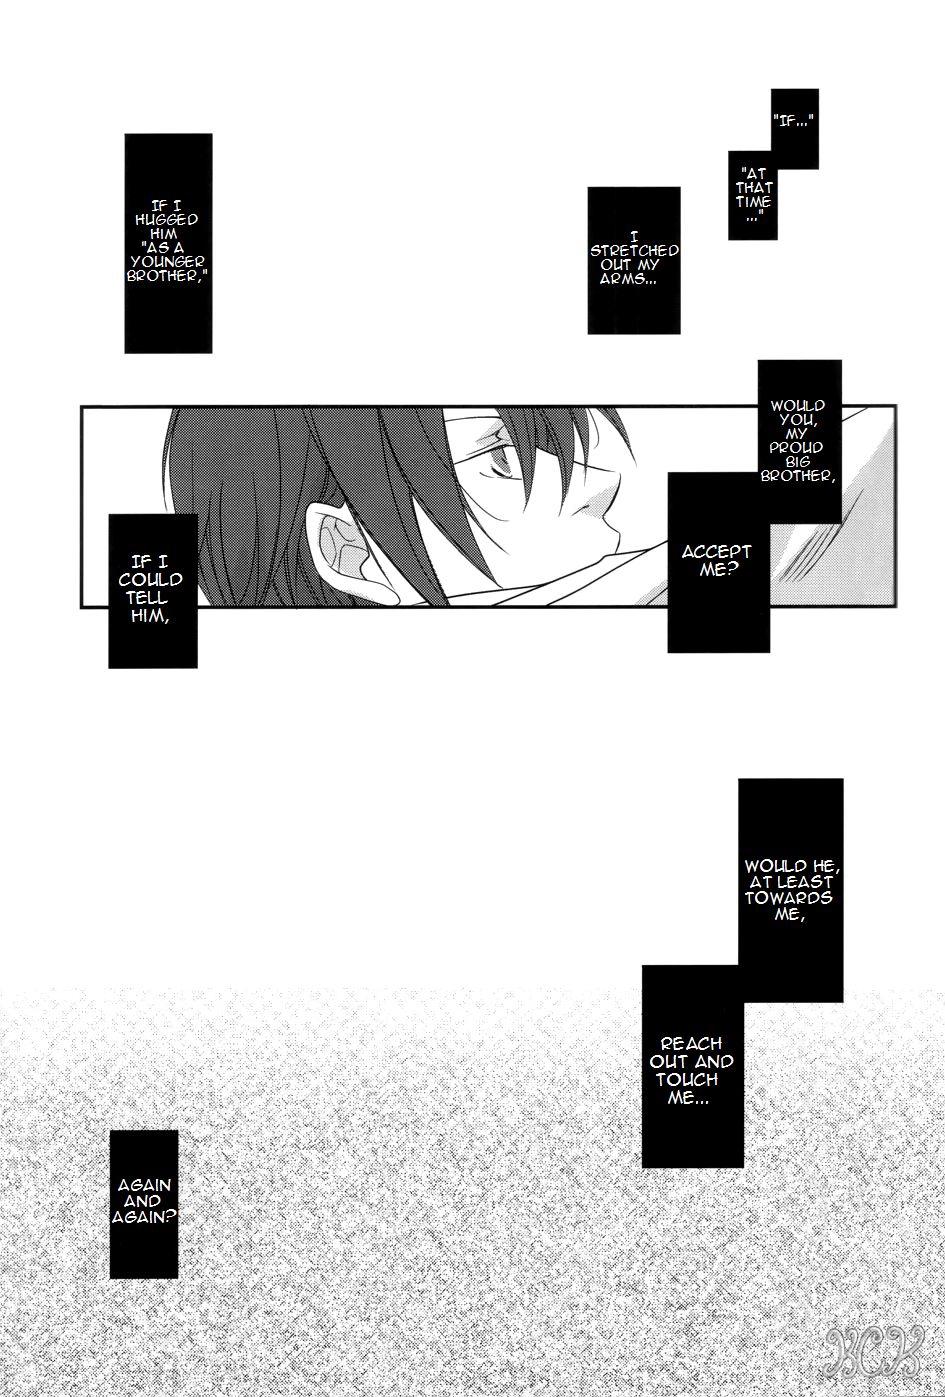 Brother However, It's Beloved, Isn't It? - Durarara Best - Page 6